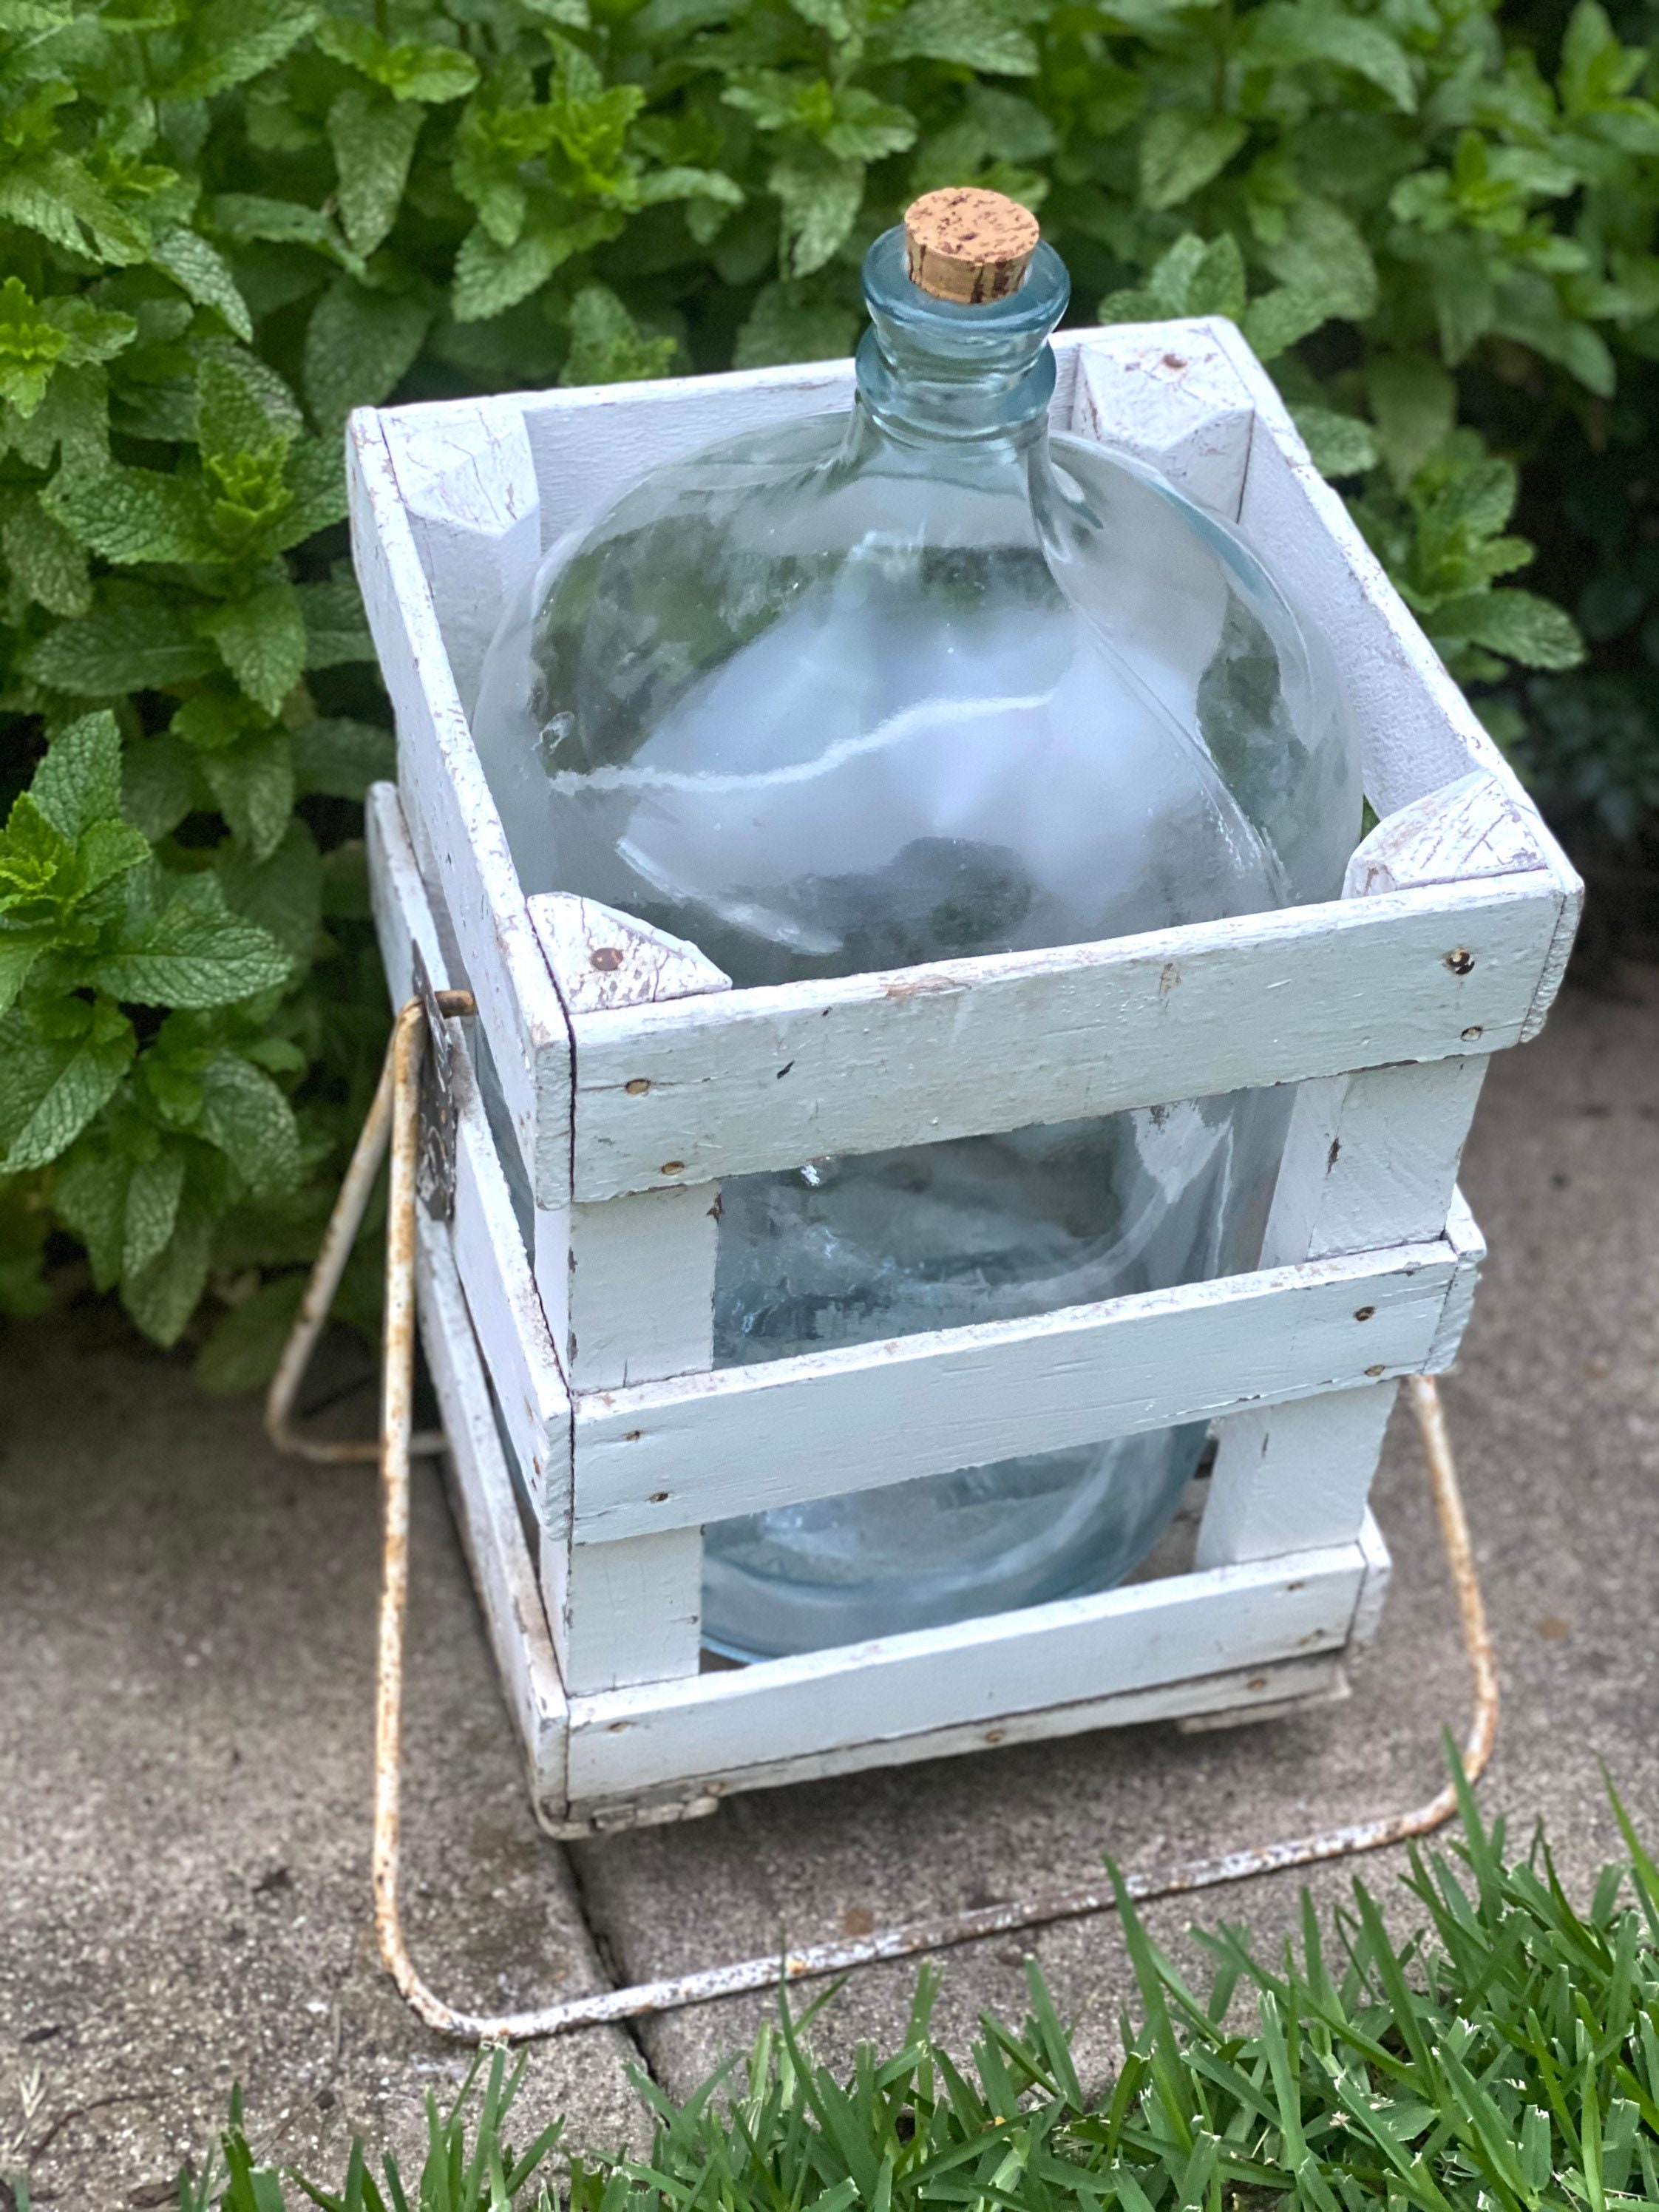 Demijohn or Carboy Glass Bottle in Original Crate